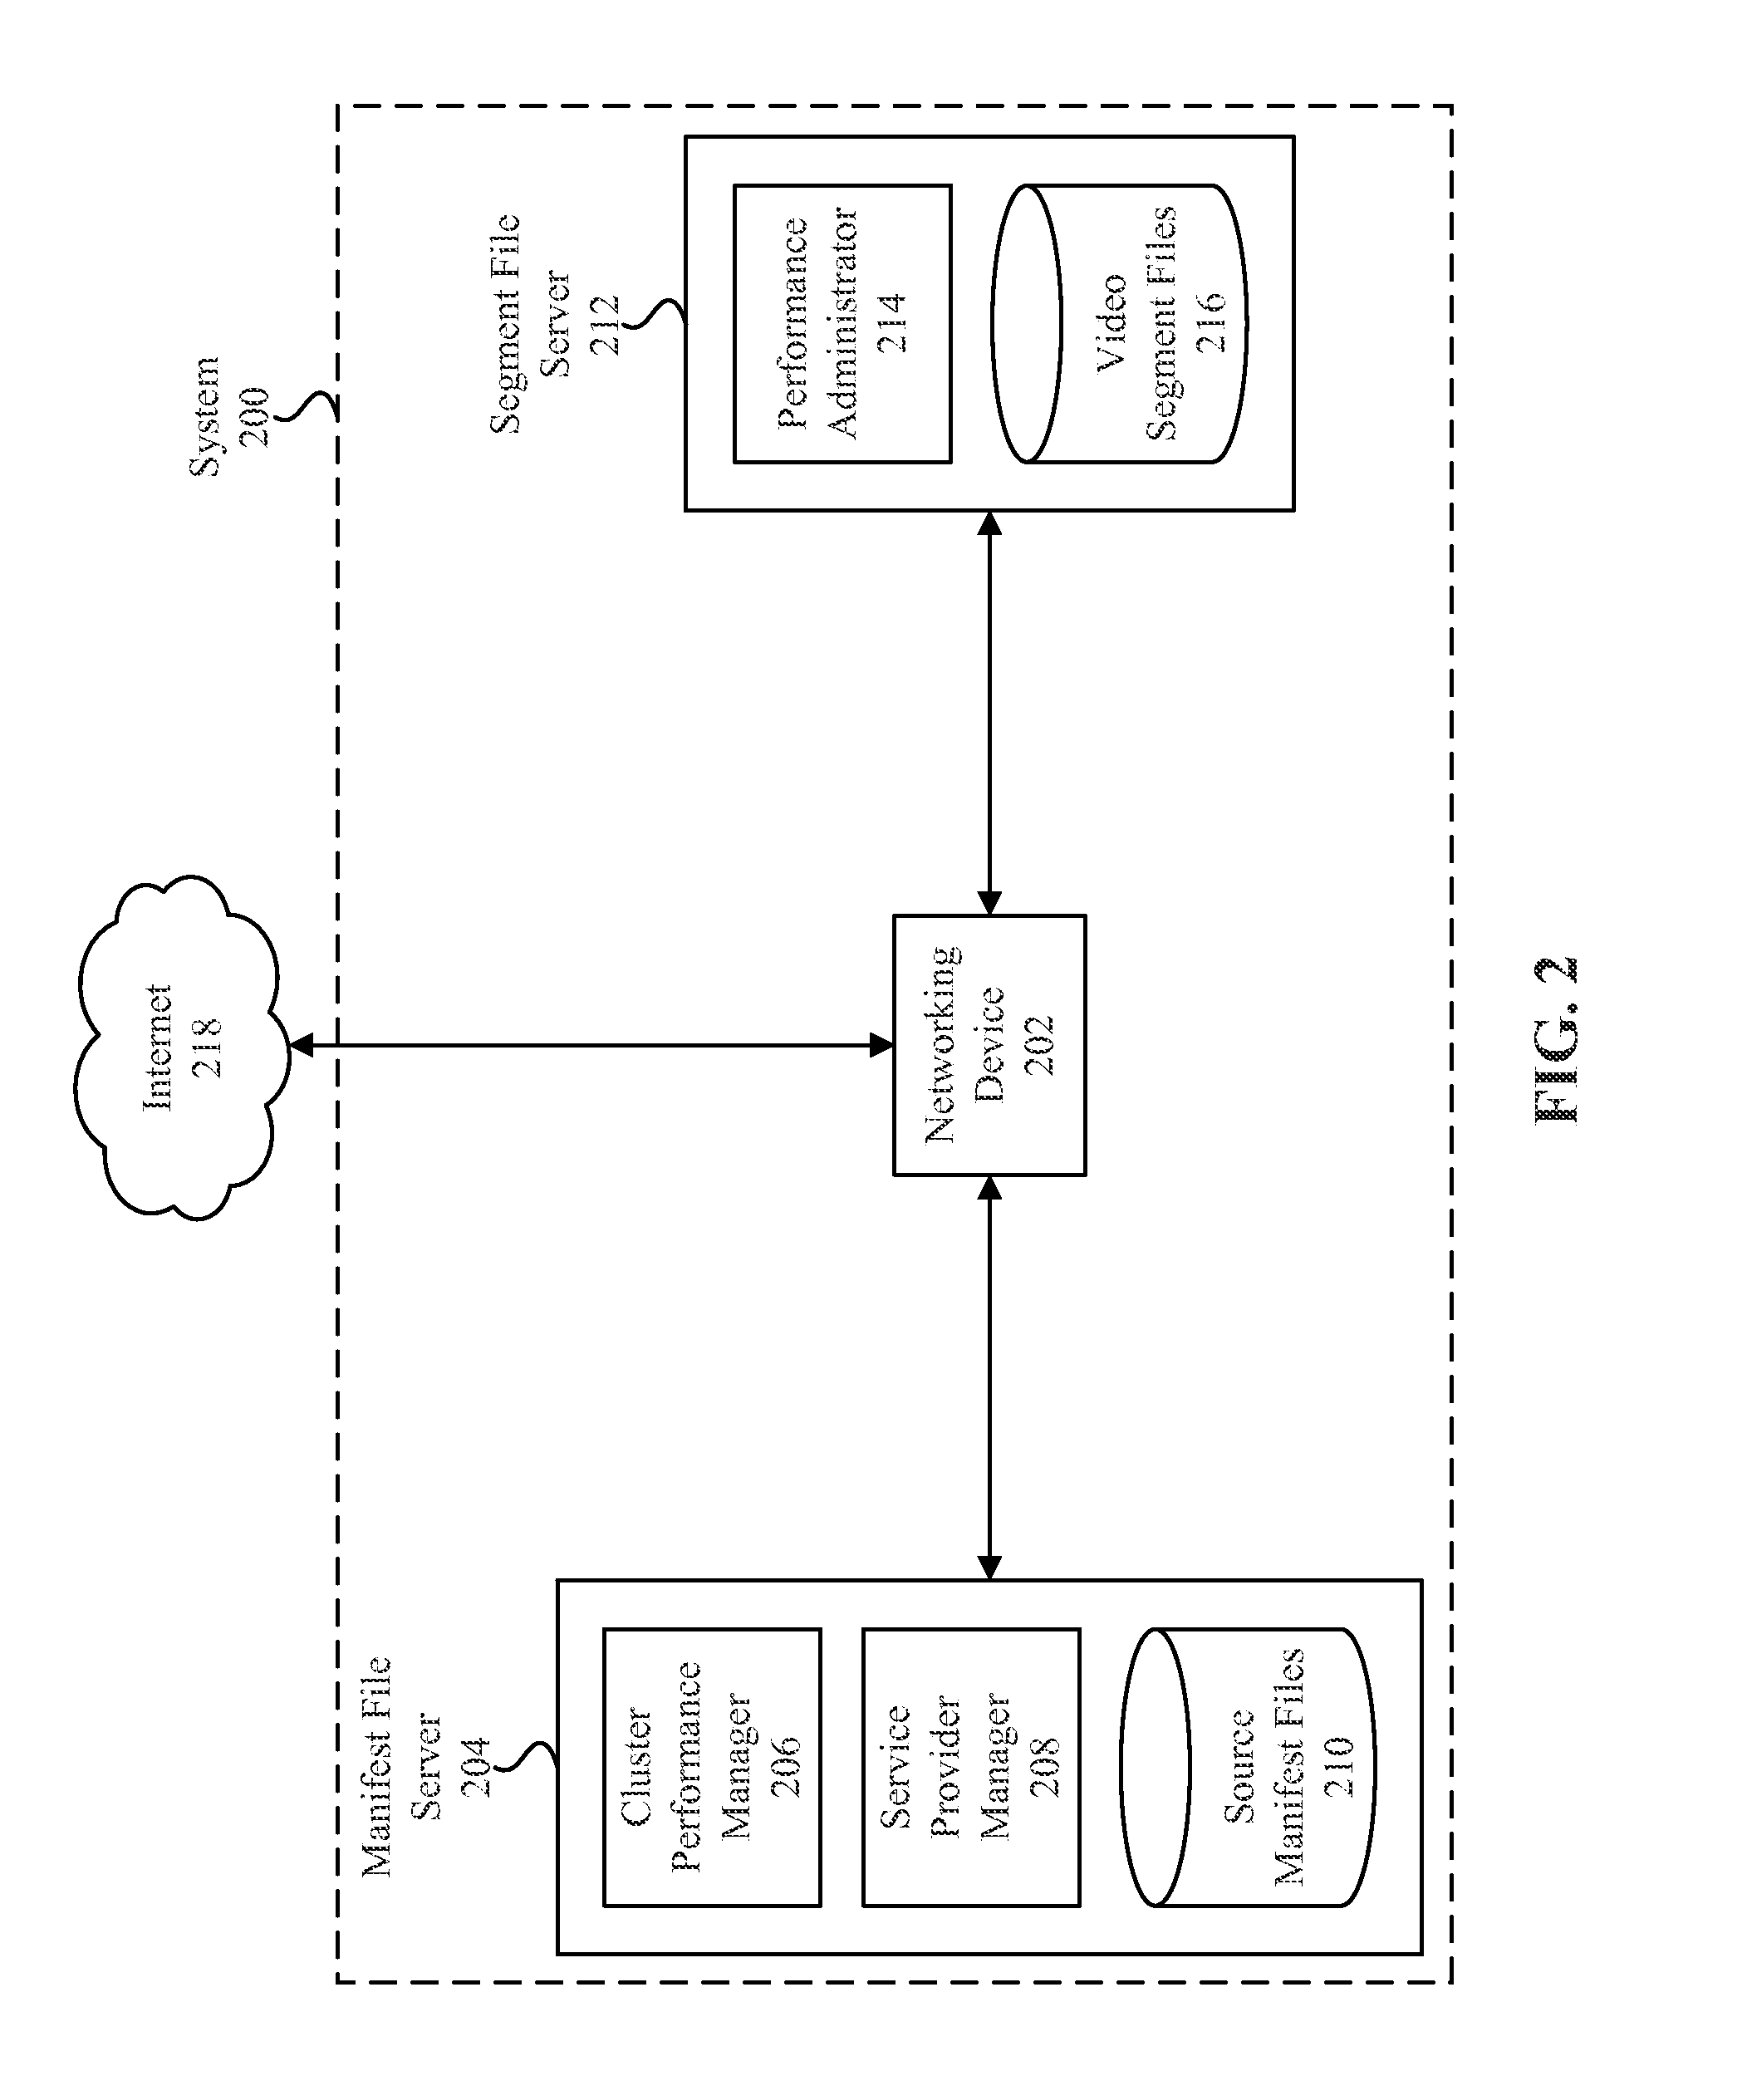 Systems and methods for session-based resource assignment, delivery, performance management and measurement in a networked environment